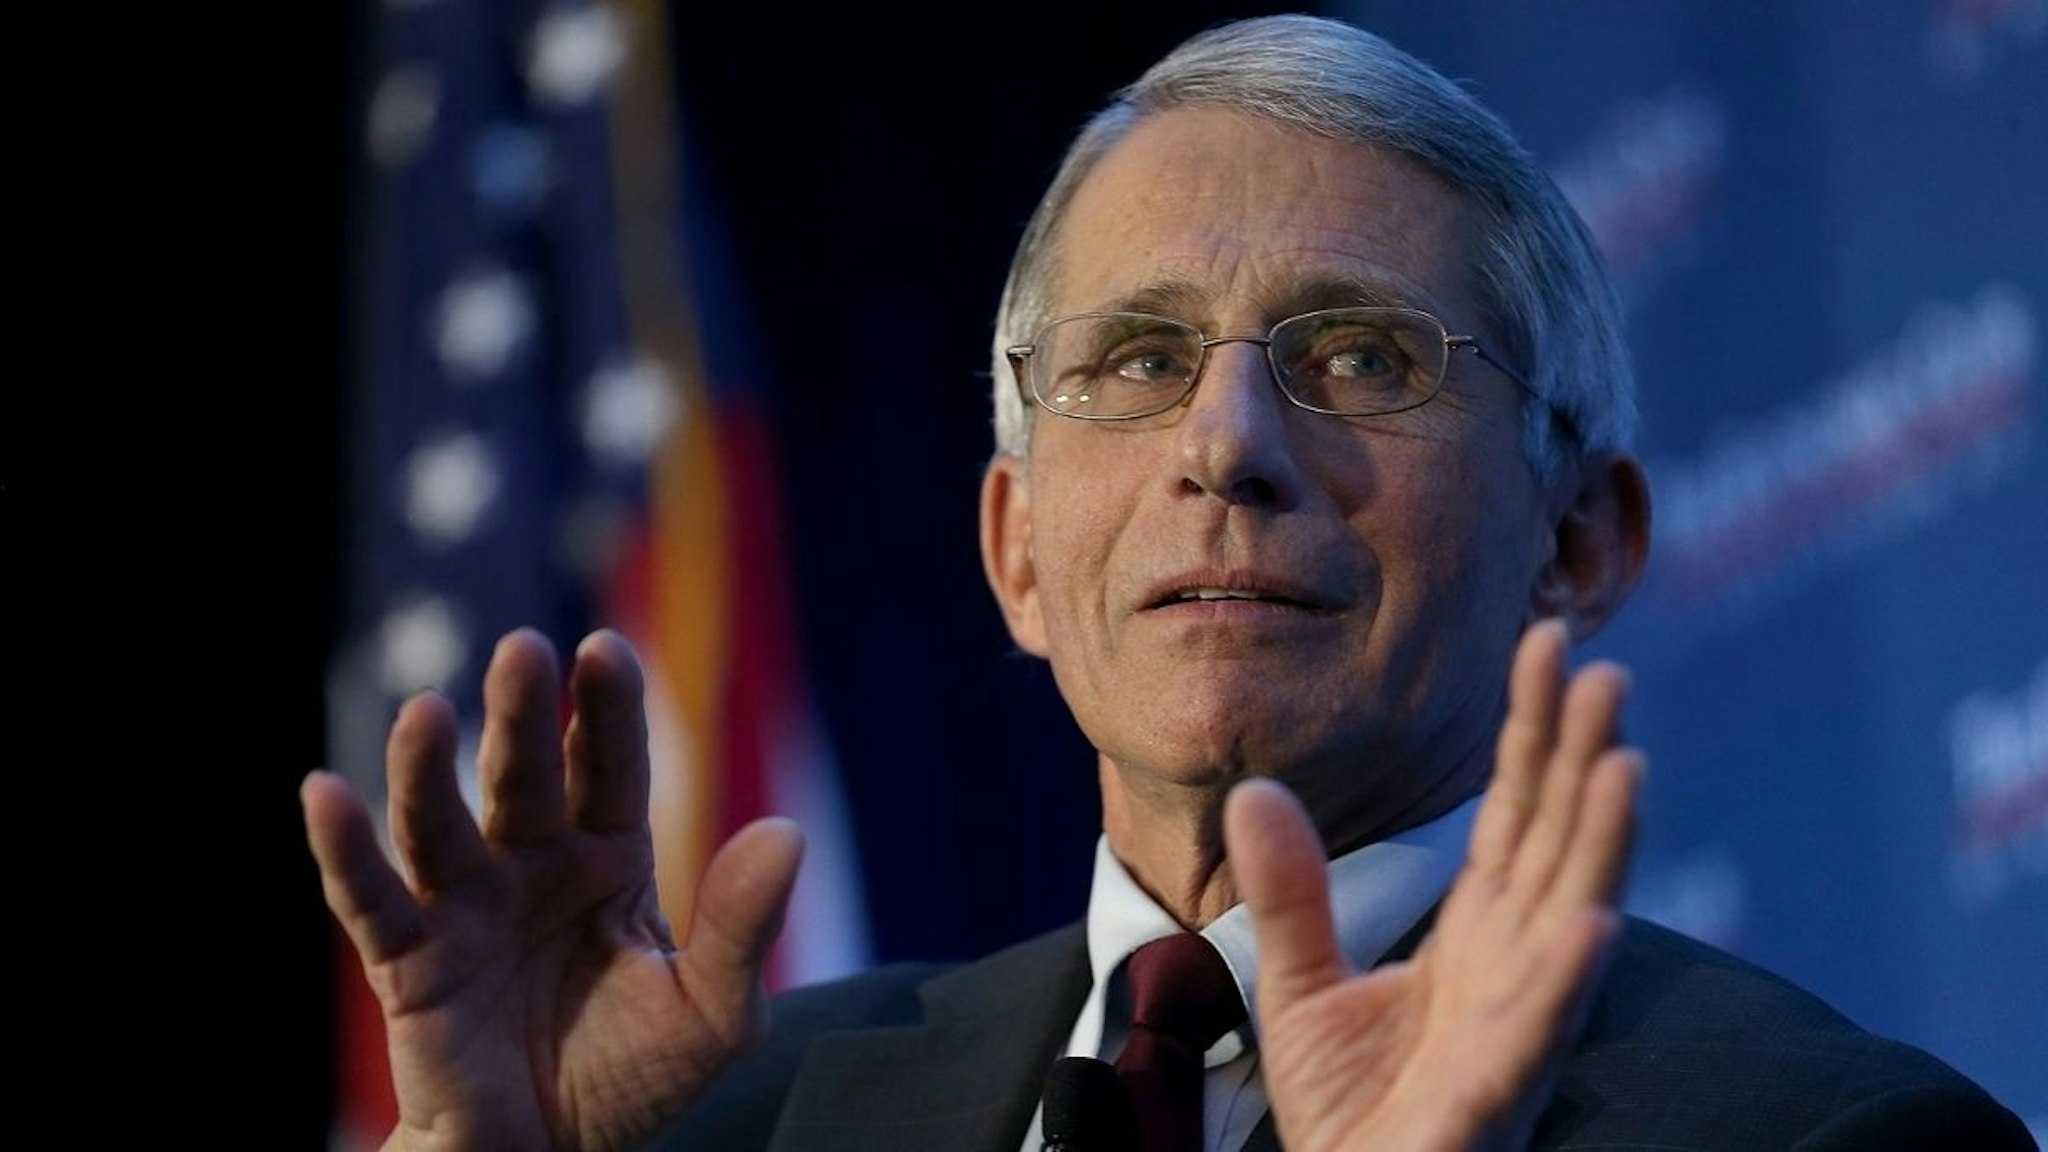 Dr. Anthony Fauci, director of the National Institute of Allergy and Infectious Diseases, discusses the Zika virus during remarks before the Economic Club of Washington January 29, 2016 in Washington, DC.